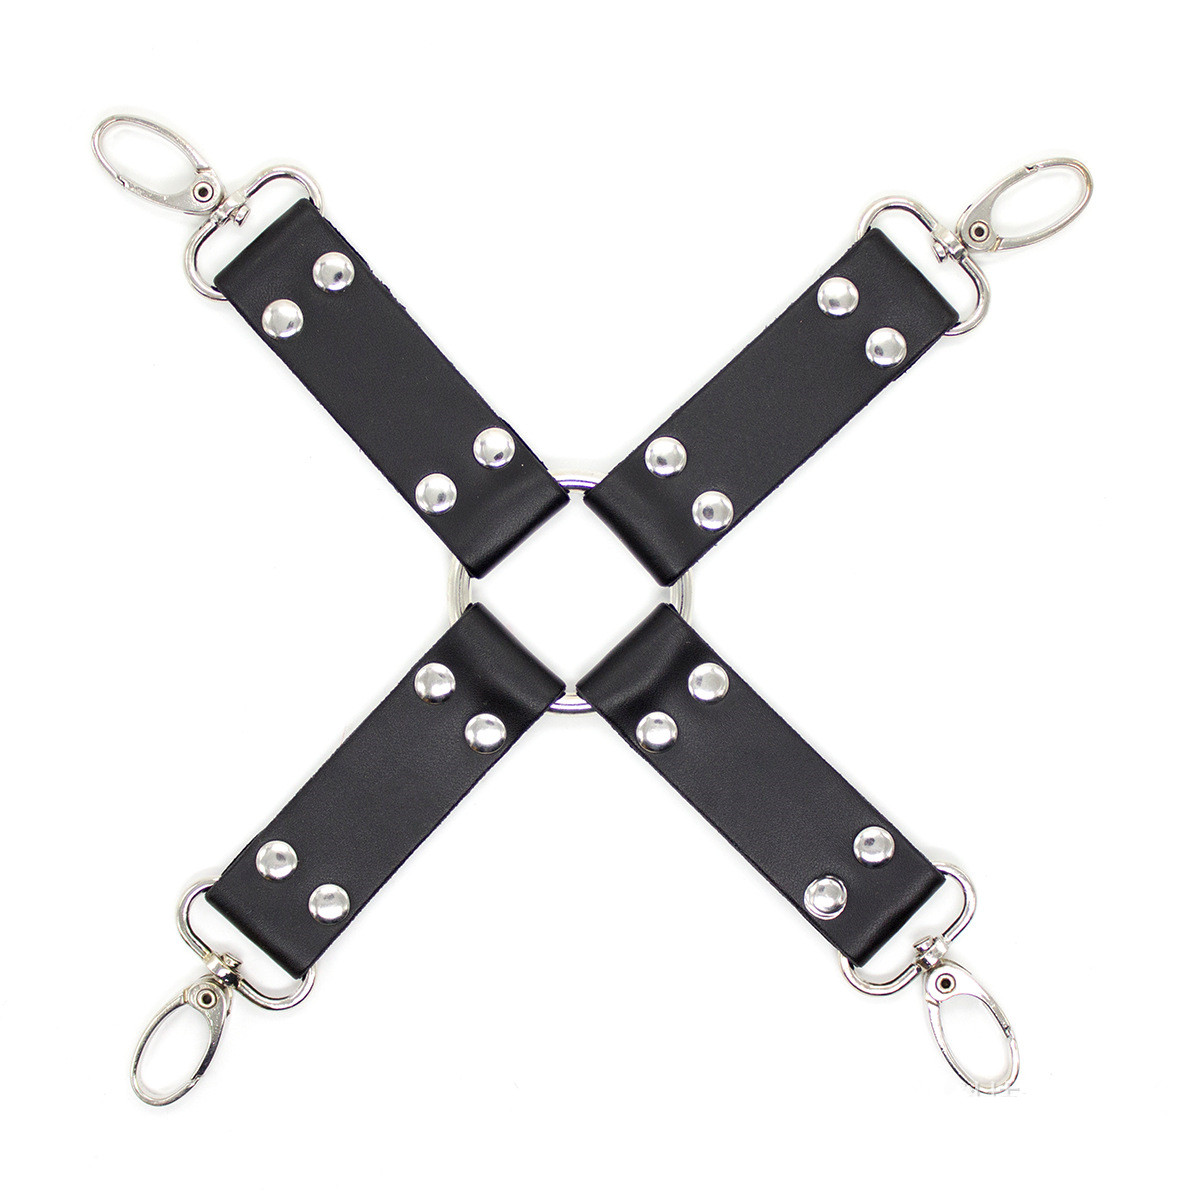 New Adjustable Leather Bondage Handcuffs Ankle Cuffs Rope Toys With Cross Bandage Buckle For Fetish Bdsm Slave Exotic Accessory